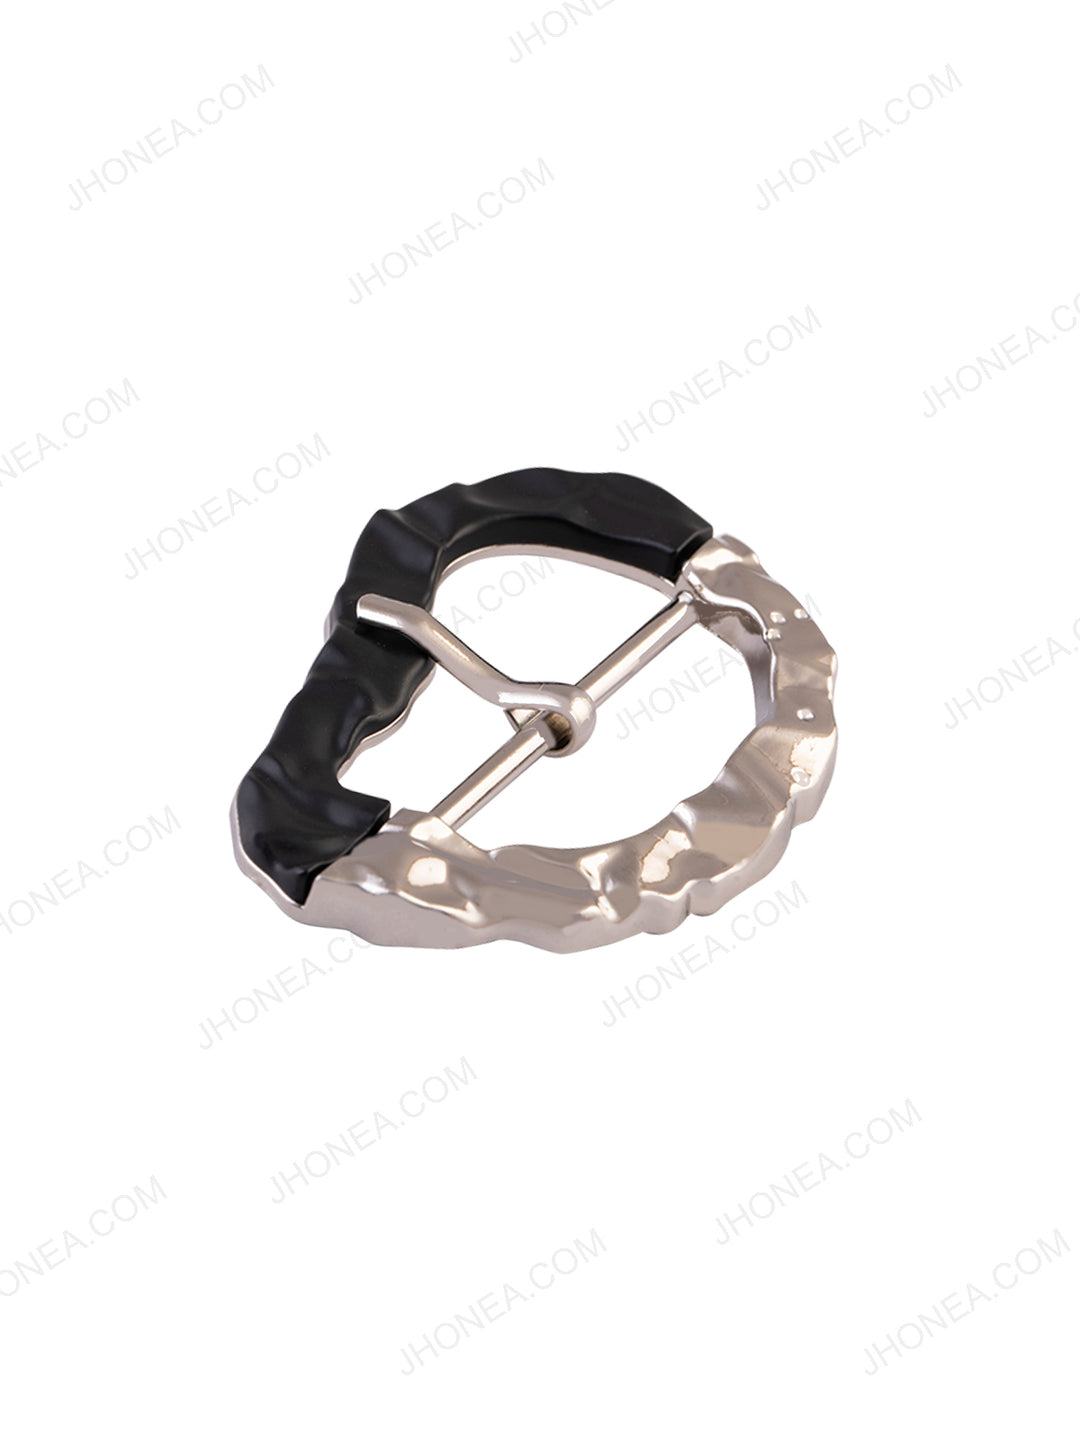 Organic Shape Shiny Silver with Black Belt Buckle with Prong